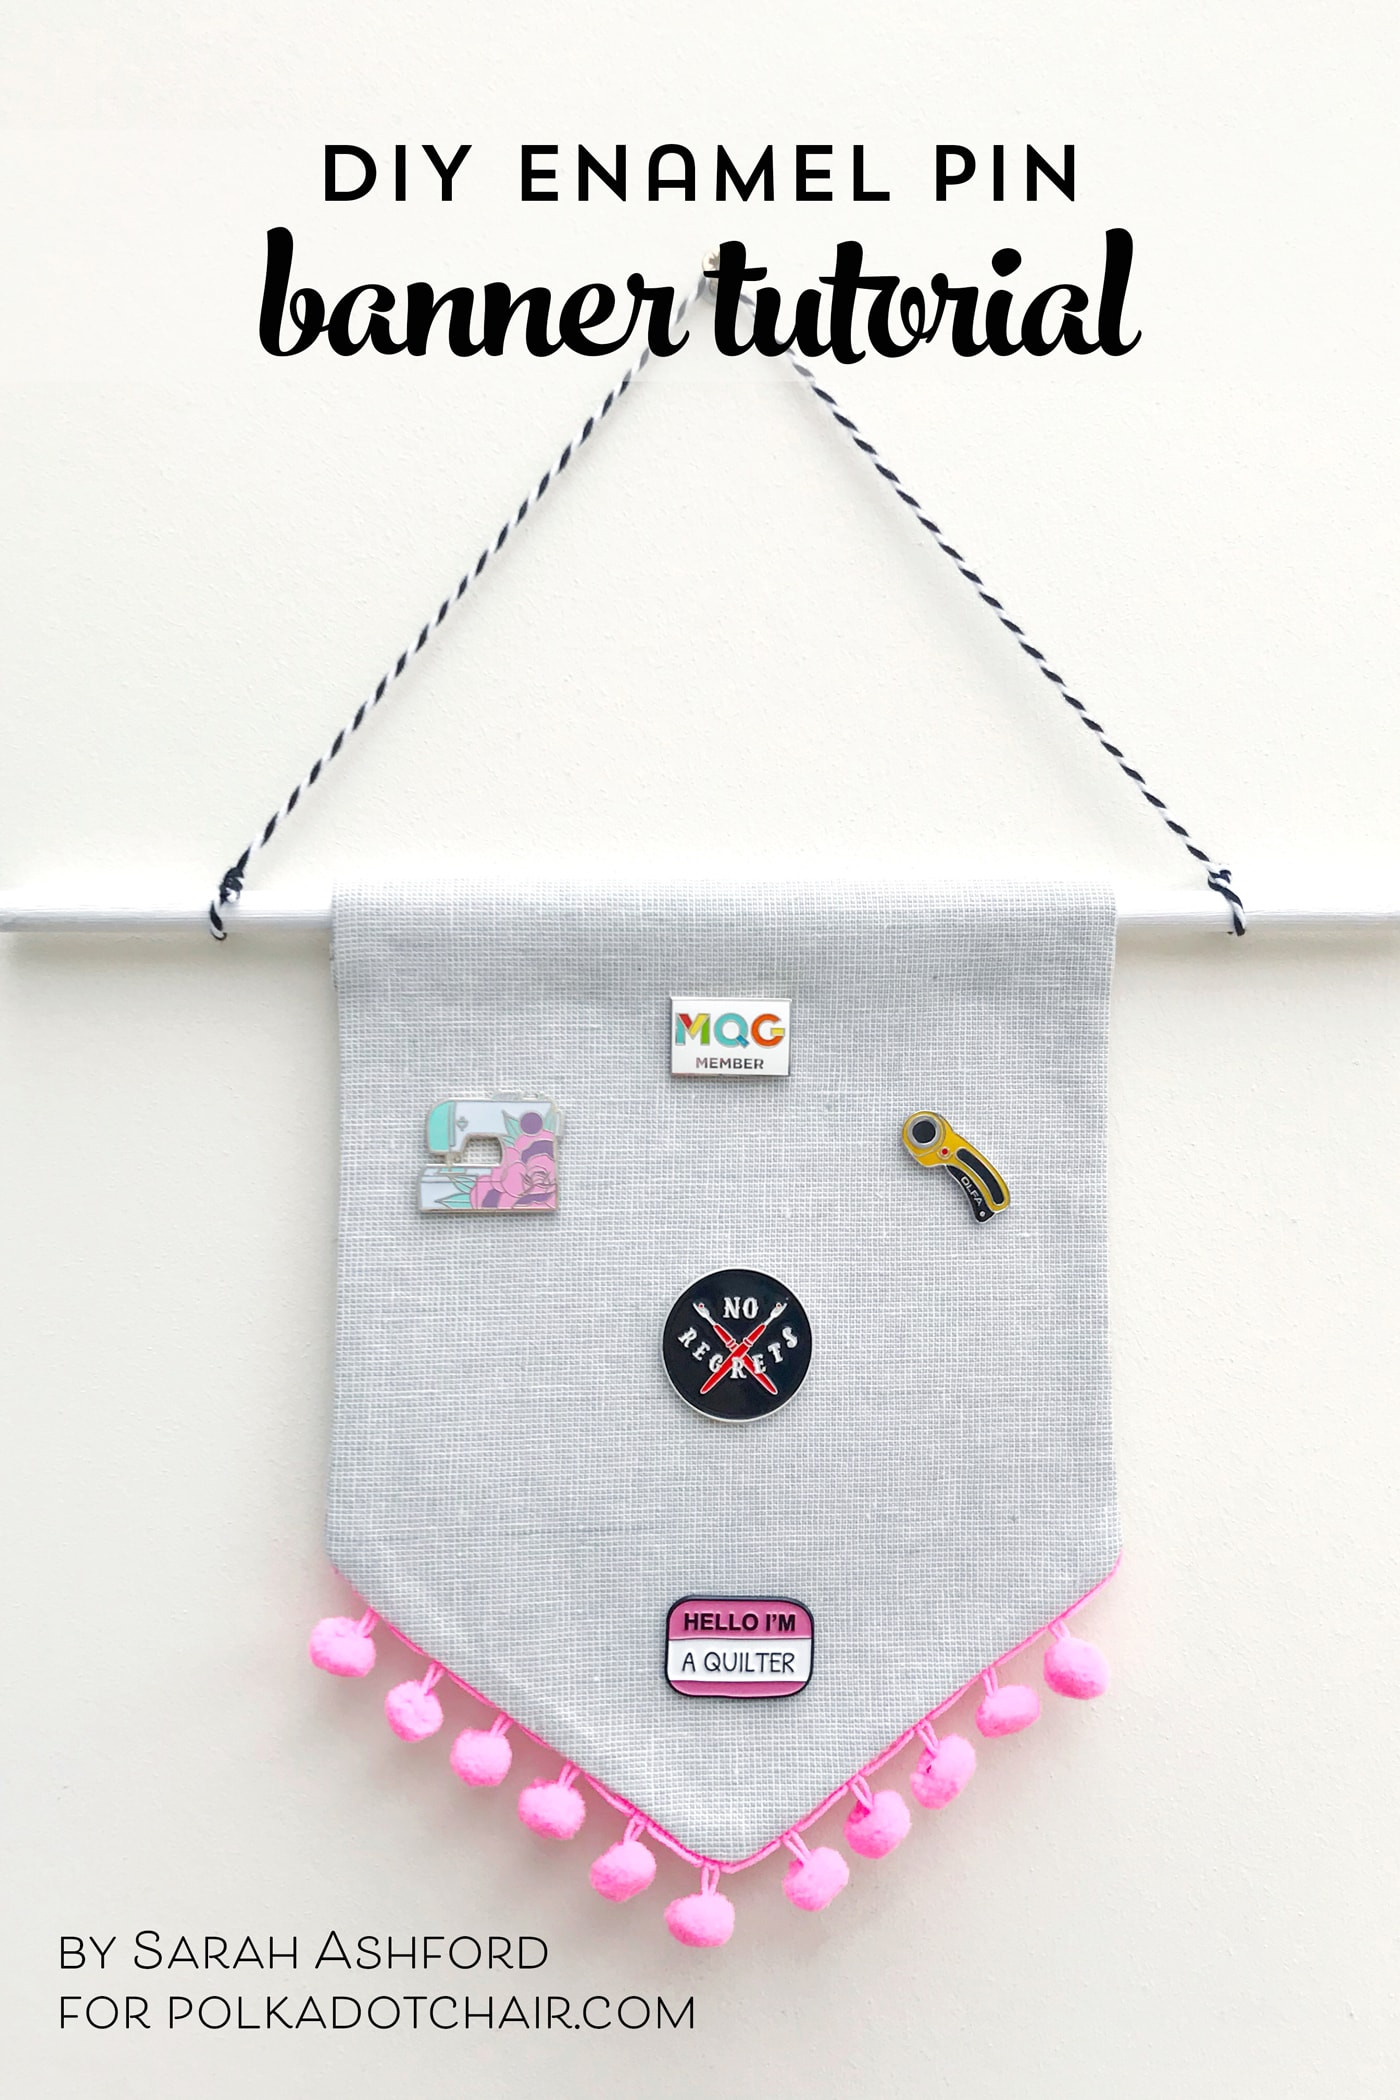 Best ideas about DIY Enamel Pins
. Save or Pin DIY Enamel Pin Banner Tutorial The Polka Dot Chair Now.